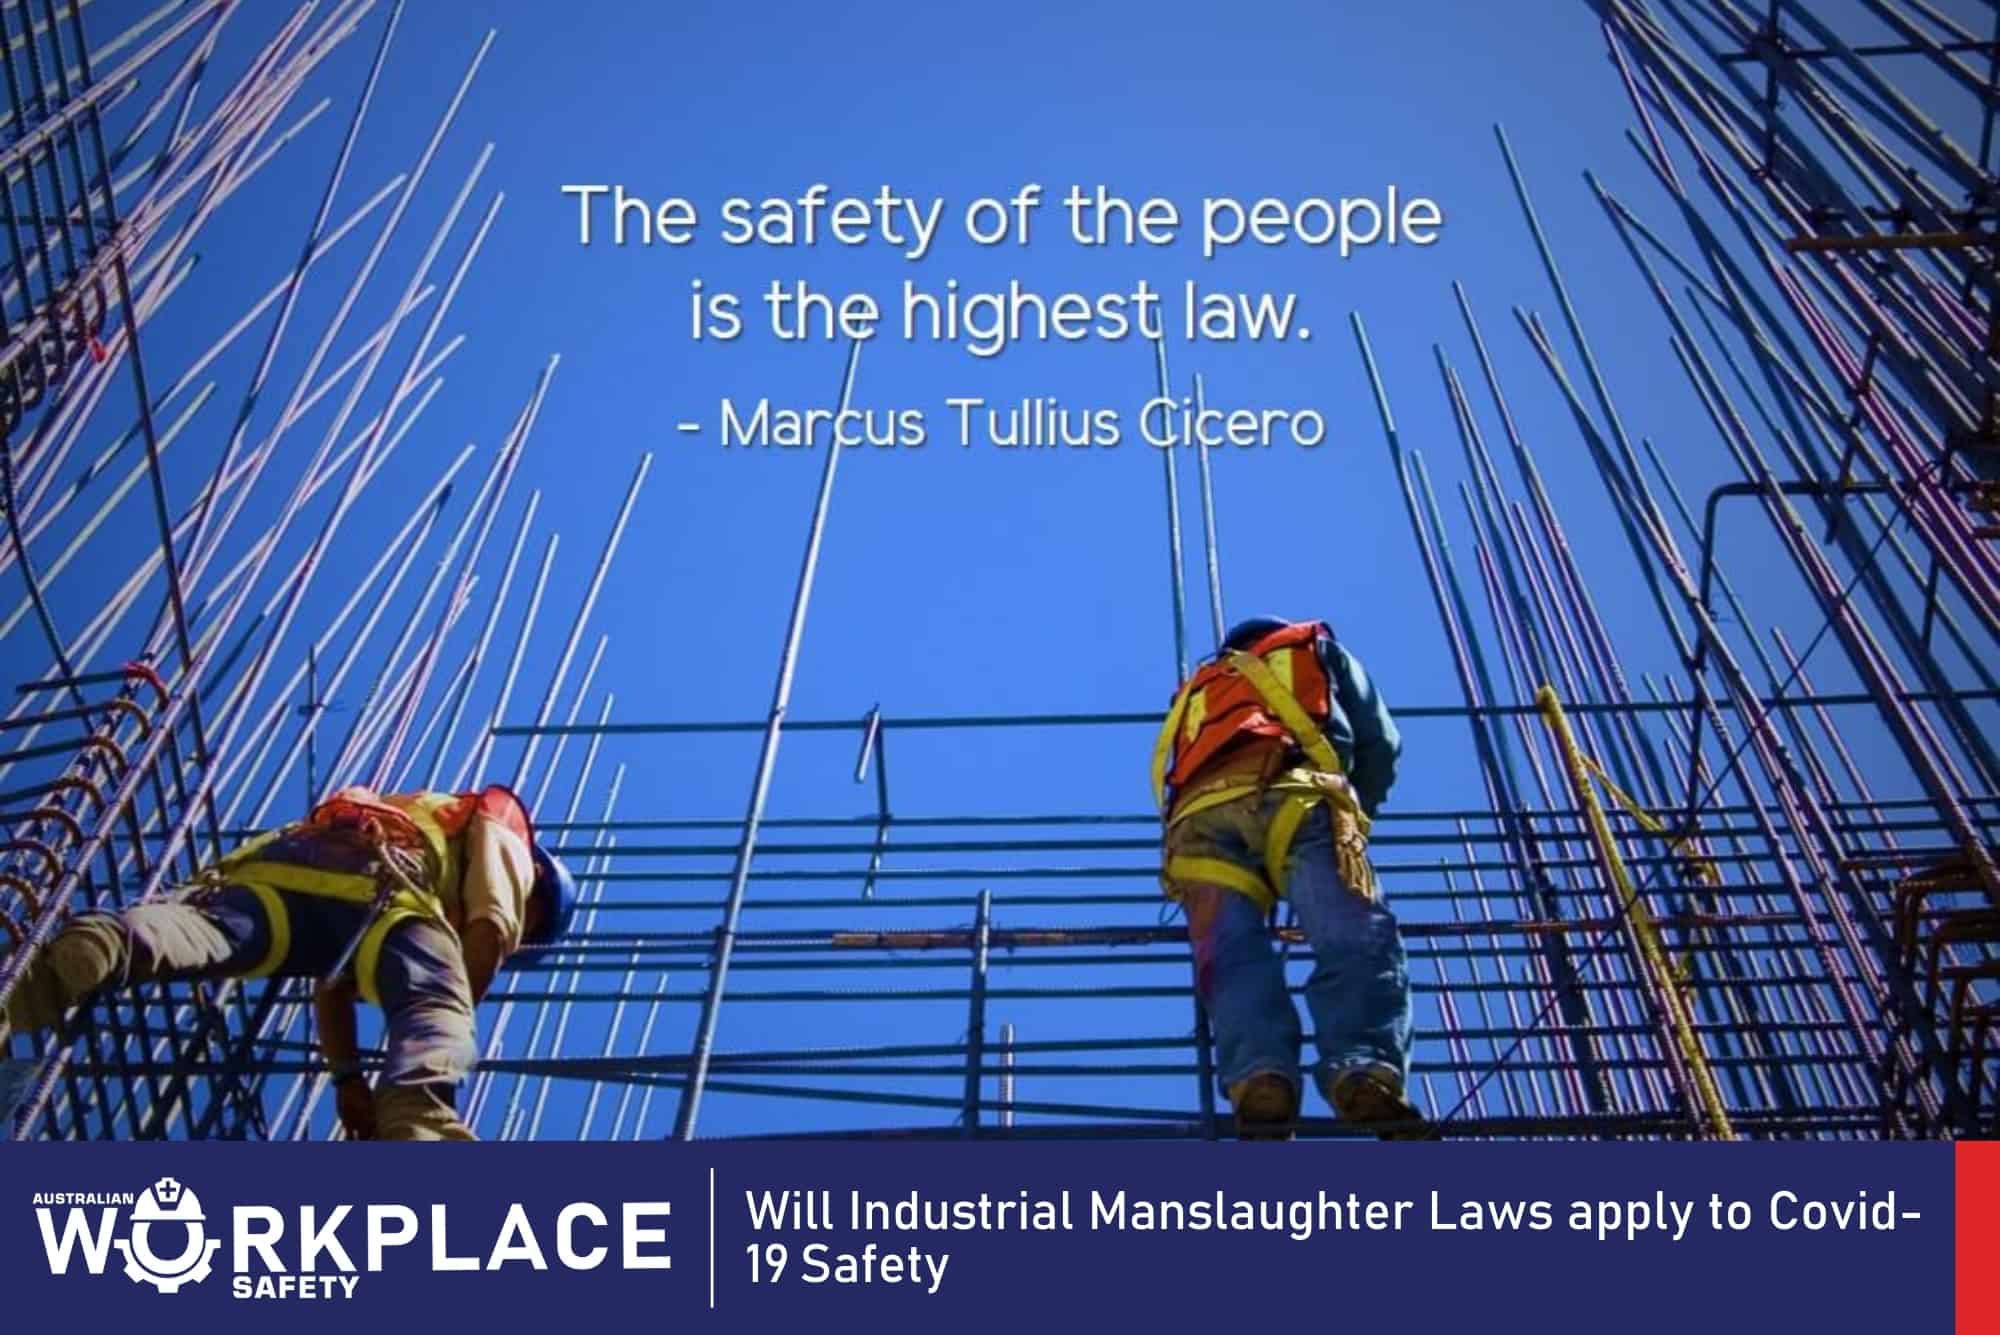 workplace safety Will Industrial Manslaughter Laws apply to Covid-19 Safety